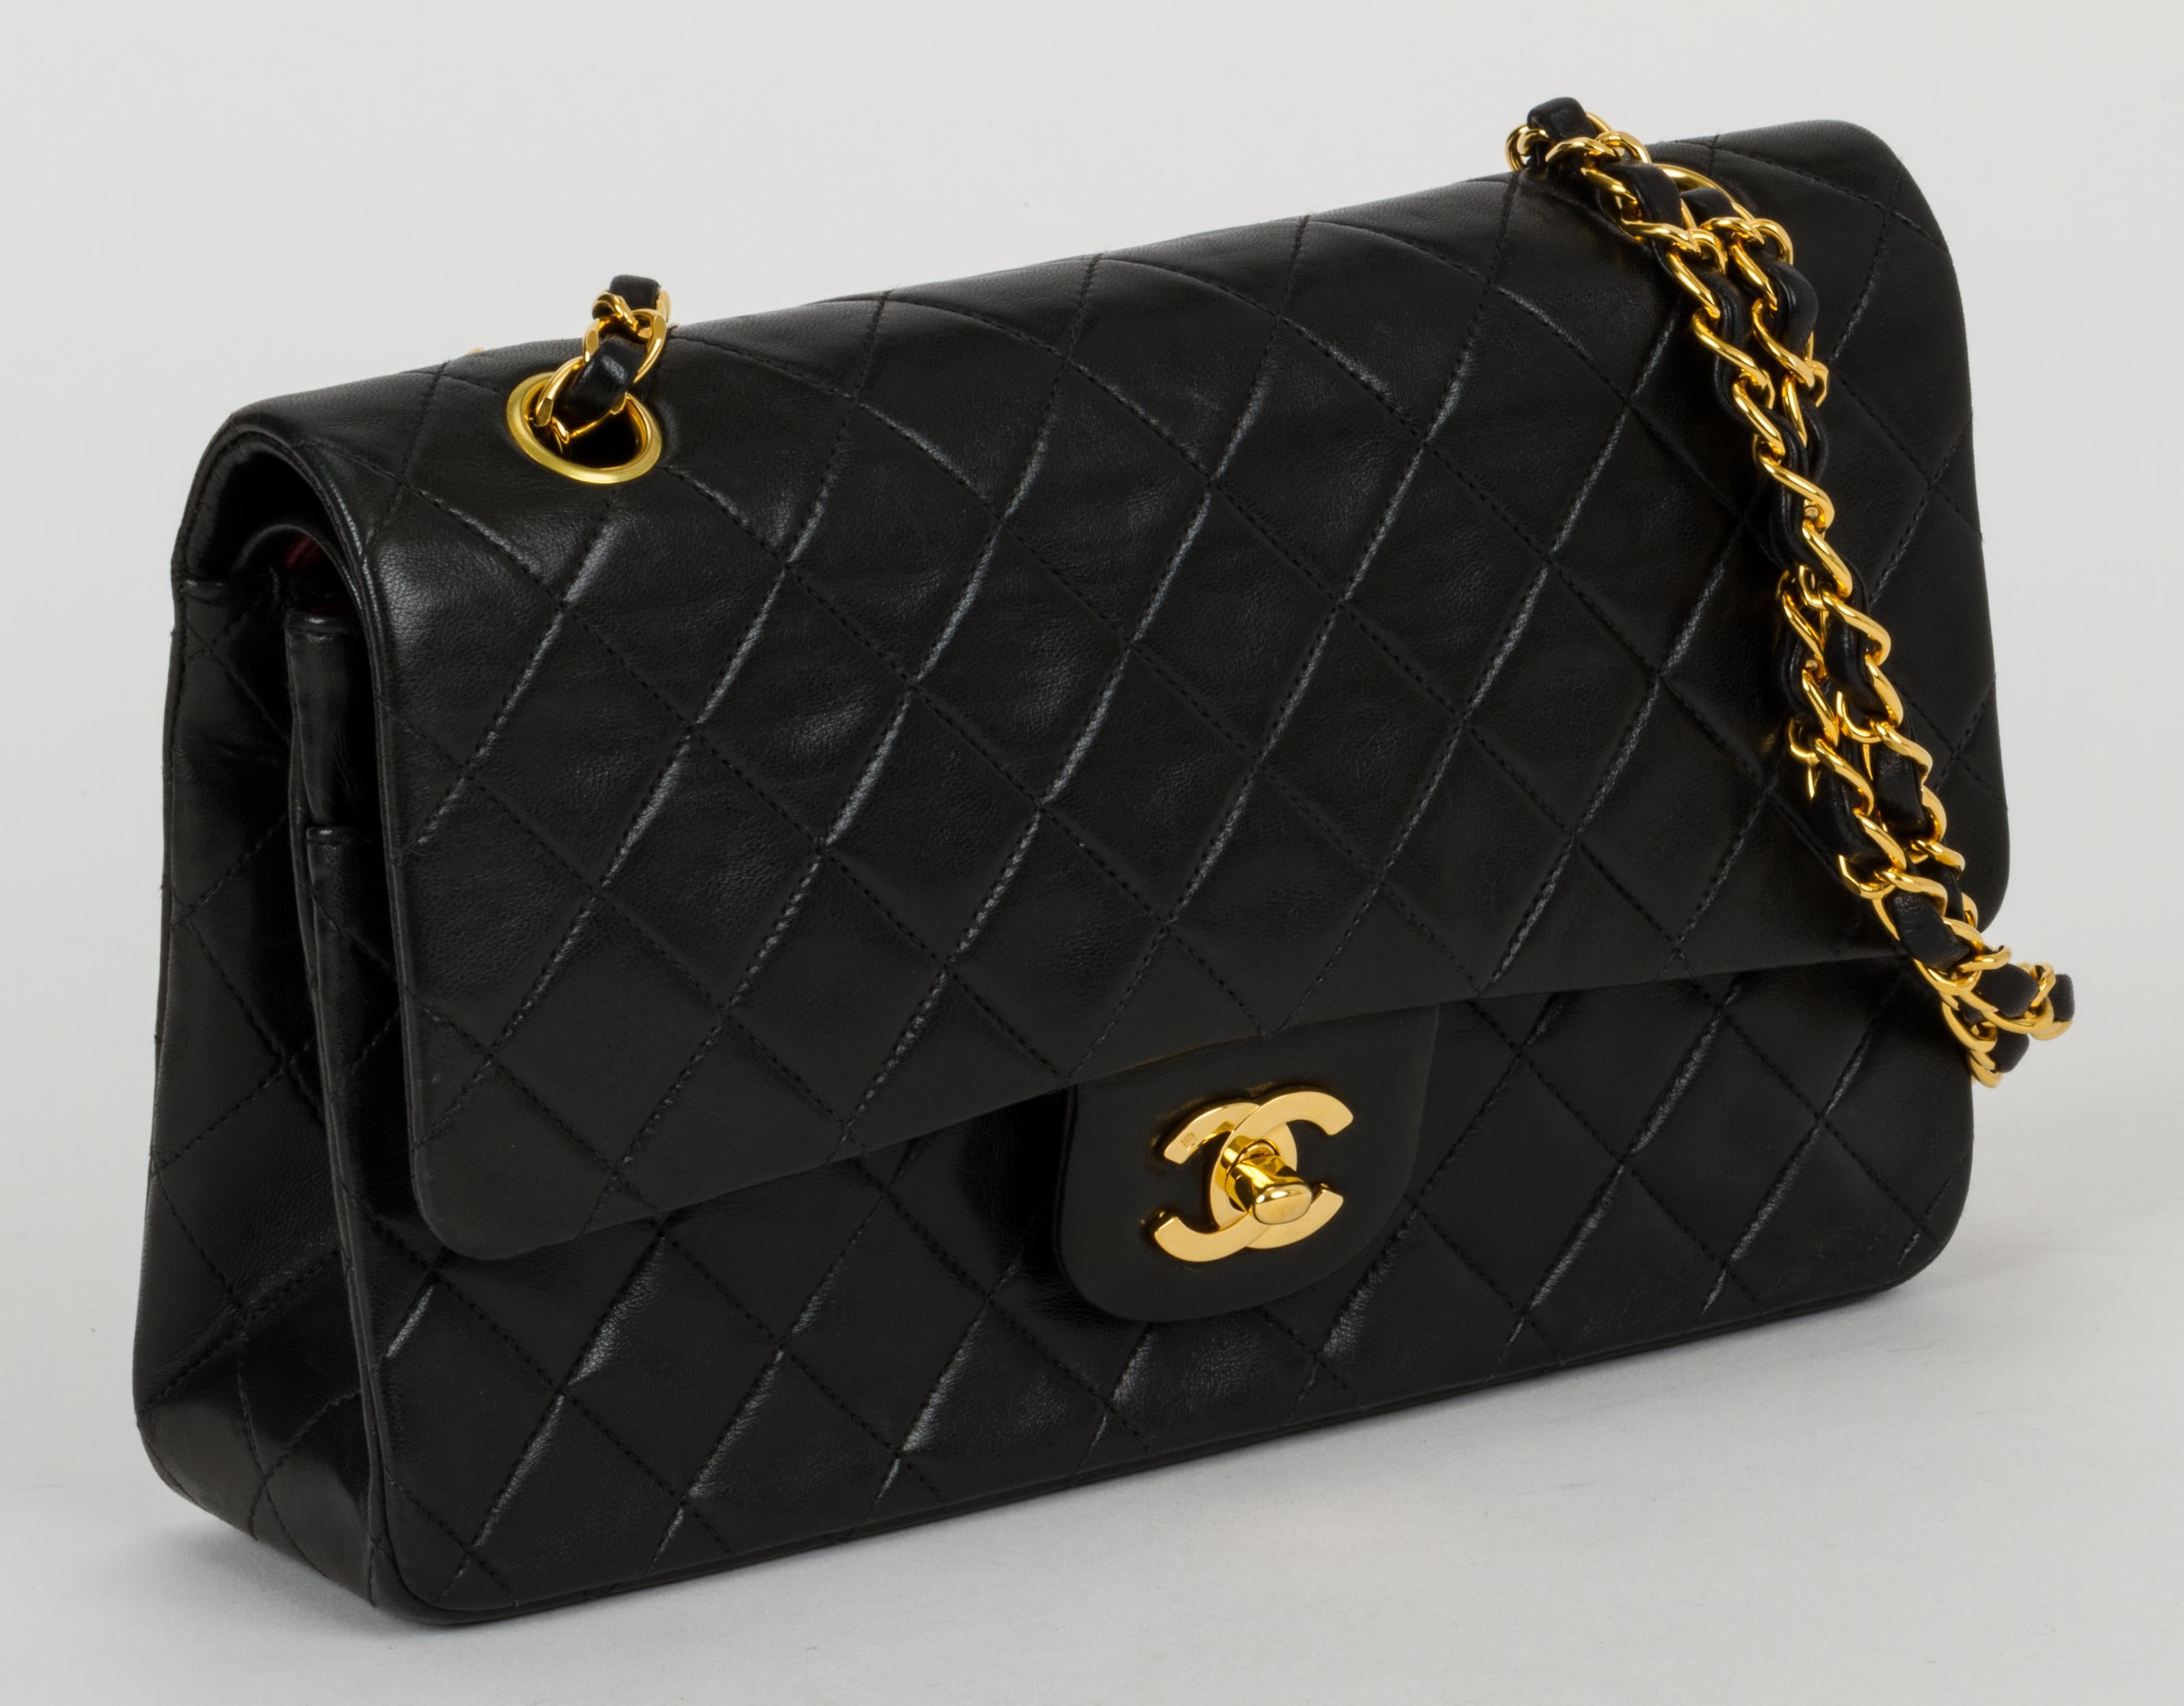 Chanel black classic double flap lambskin 2.55 bag. Can be worn two ways: shoulder drop, 17.5